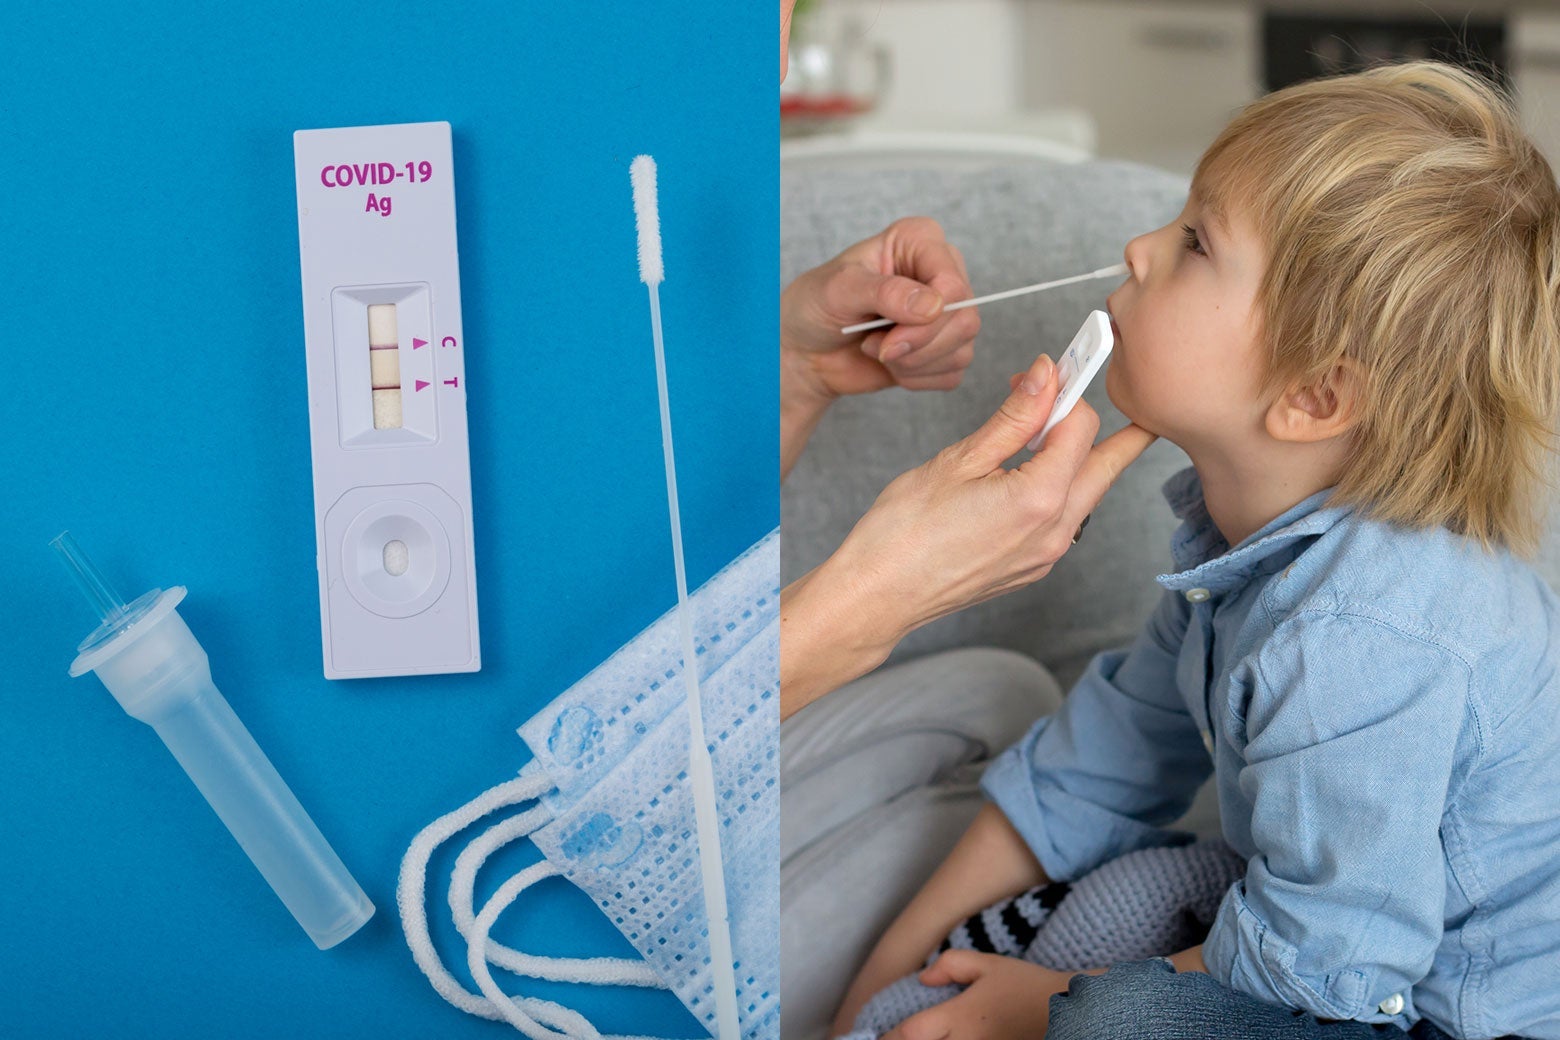 An image of an at-home test kit laid out on a blue surface, next to an image of adult hands administering a test to a toddler. 